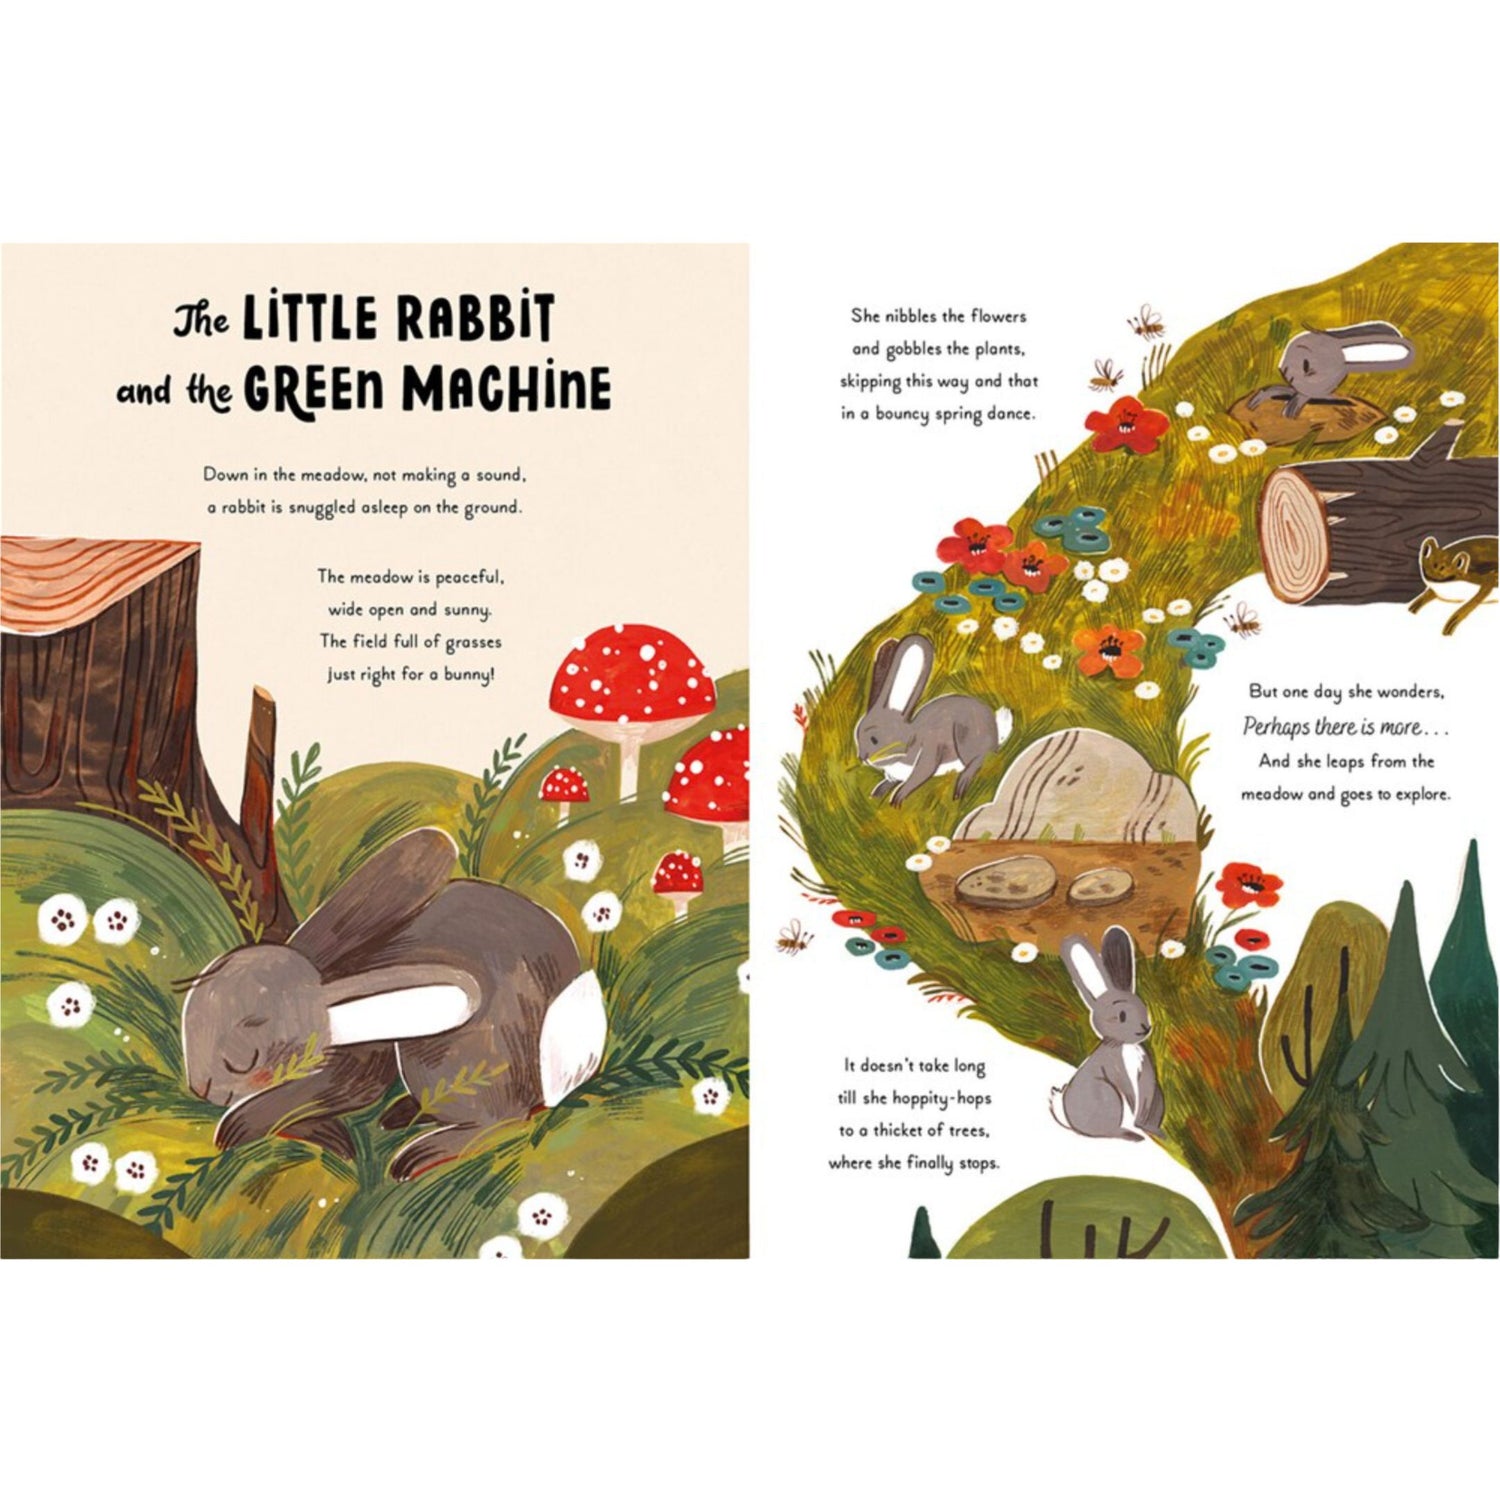 5 Minute Nature Stories: A Picture Book | Hardcover